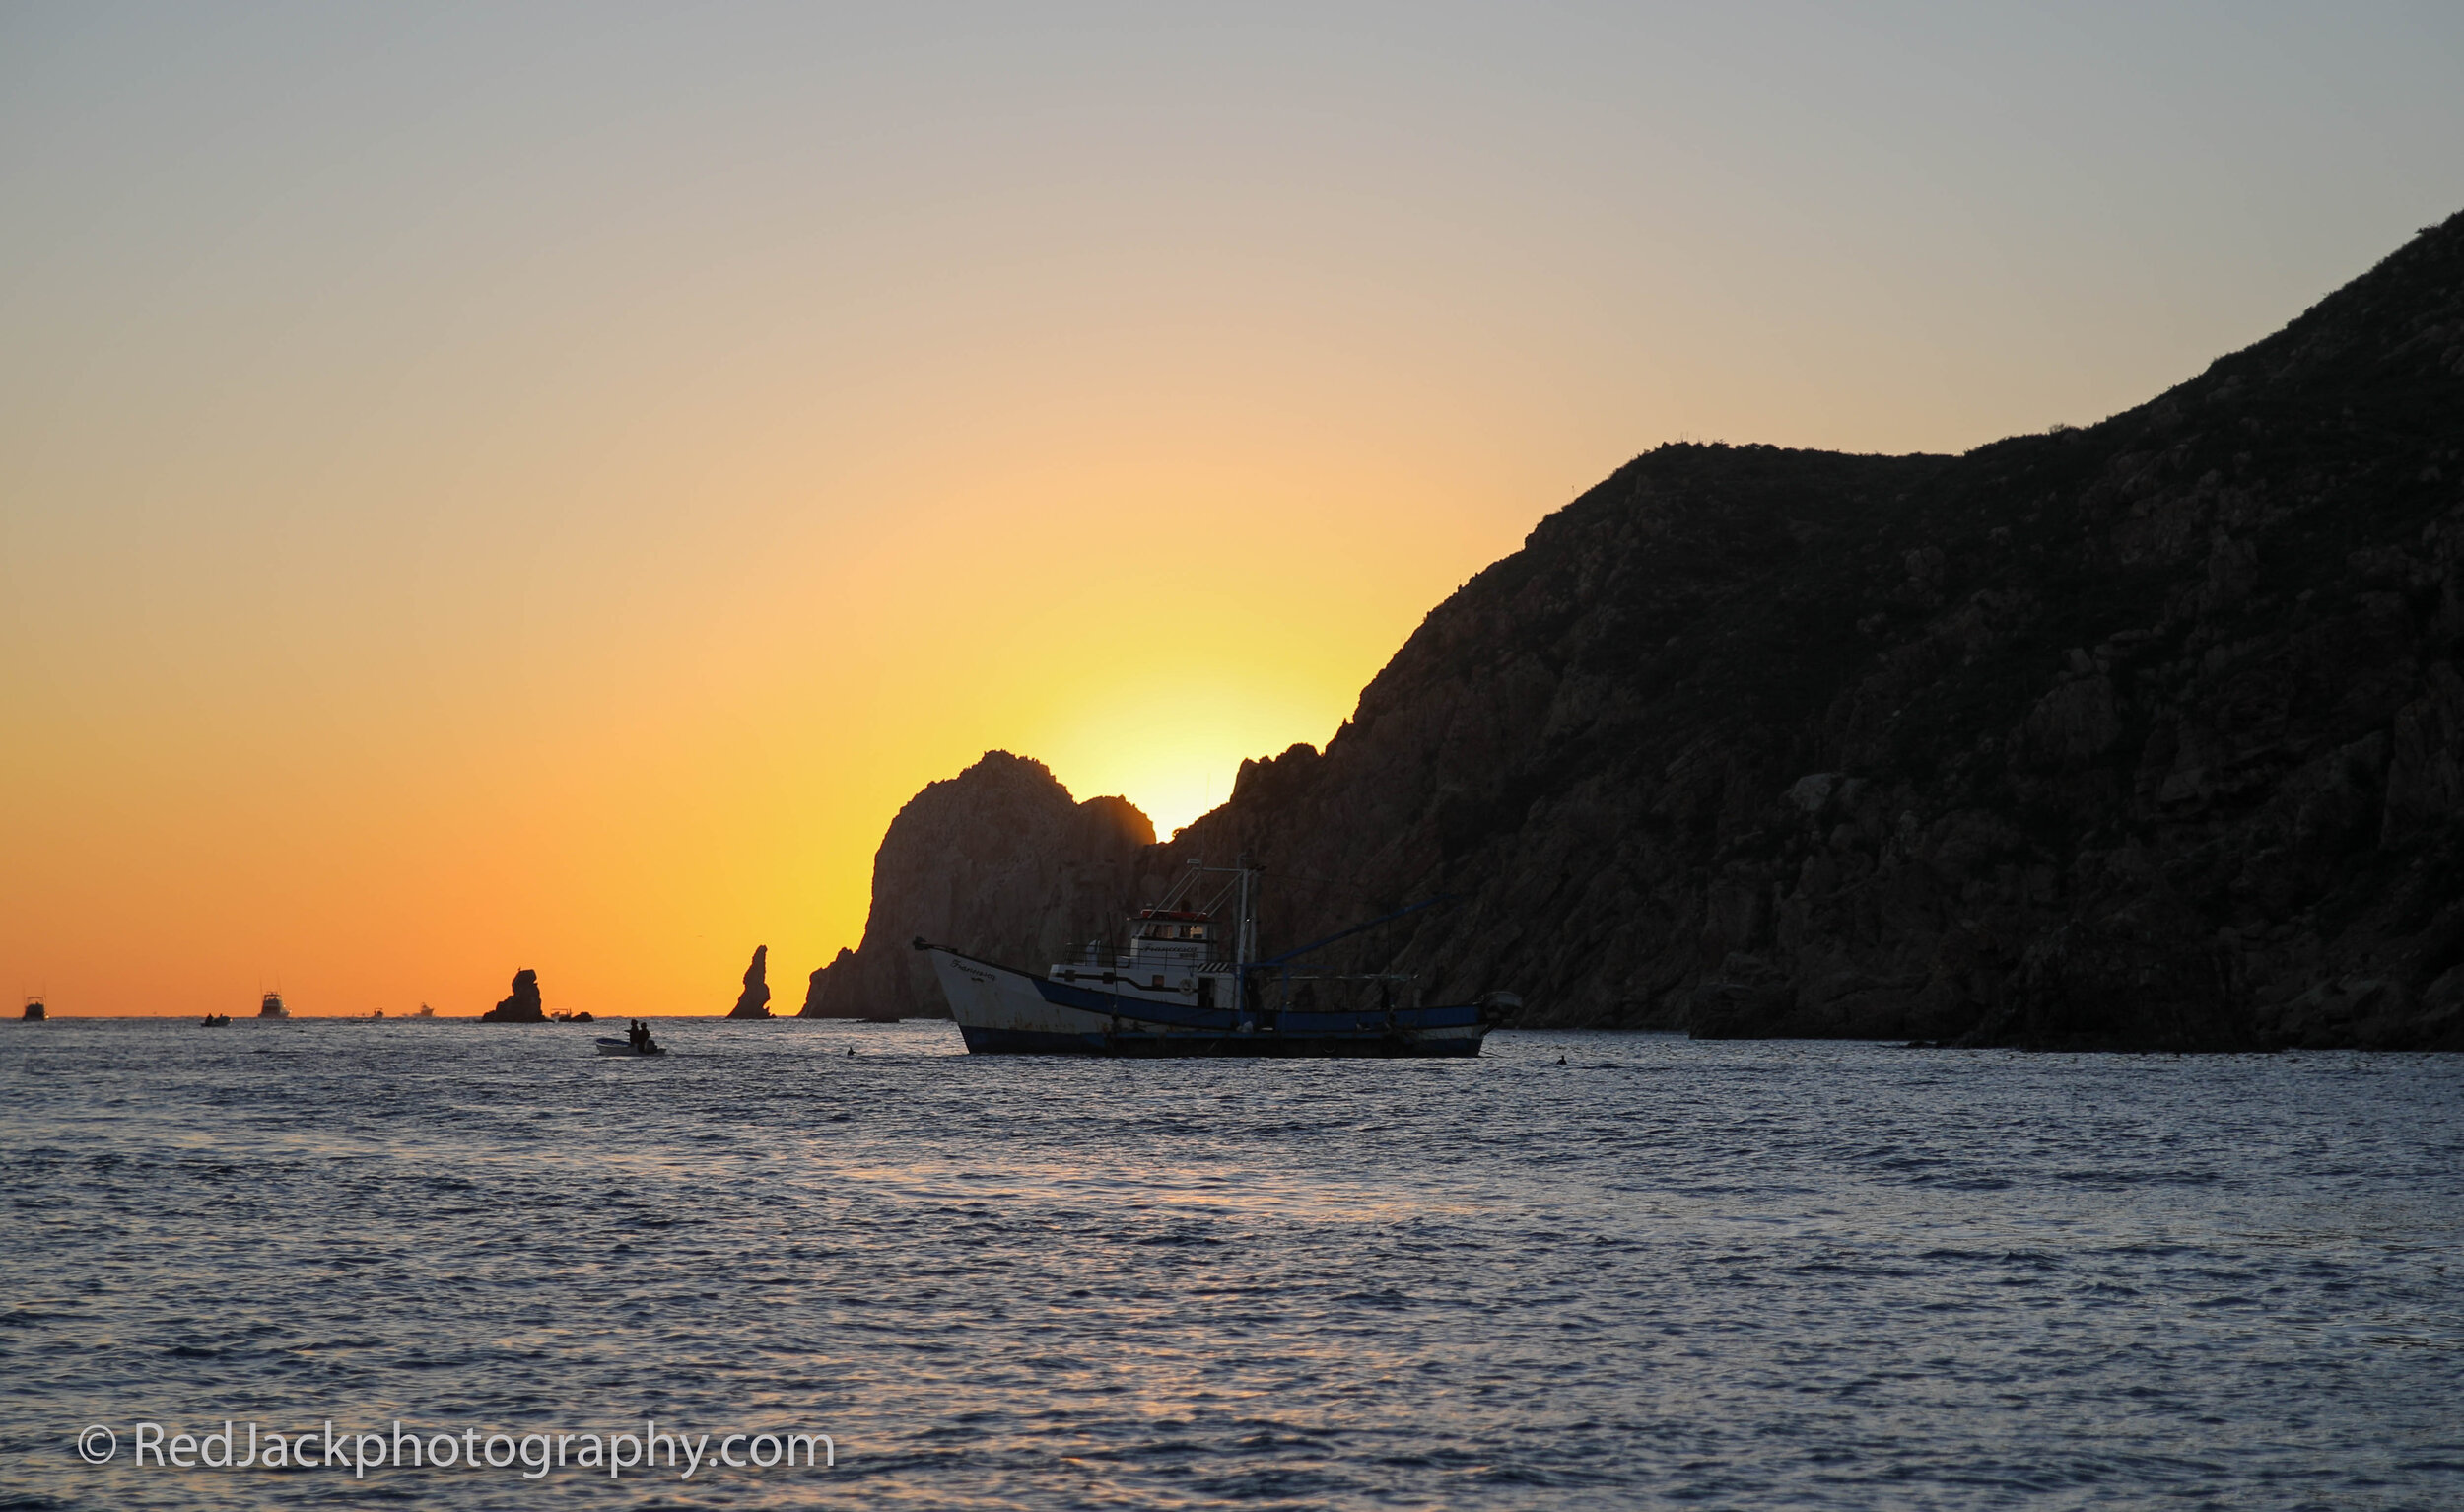 Cabo always provides for good sunrises... particularly when going fishing